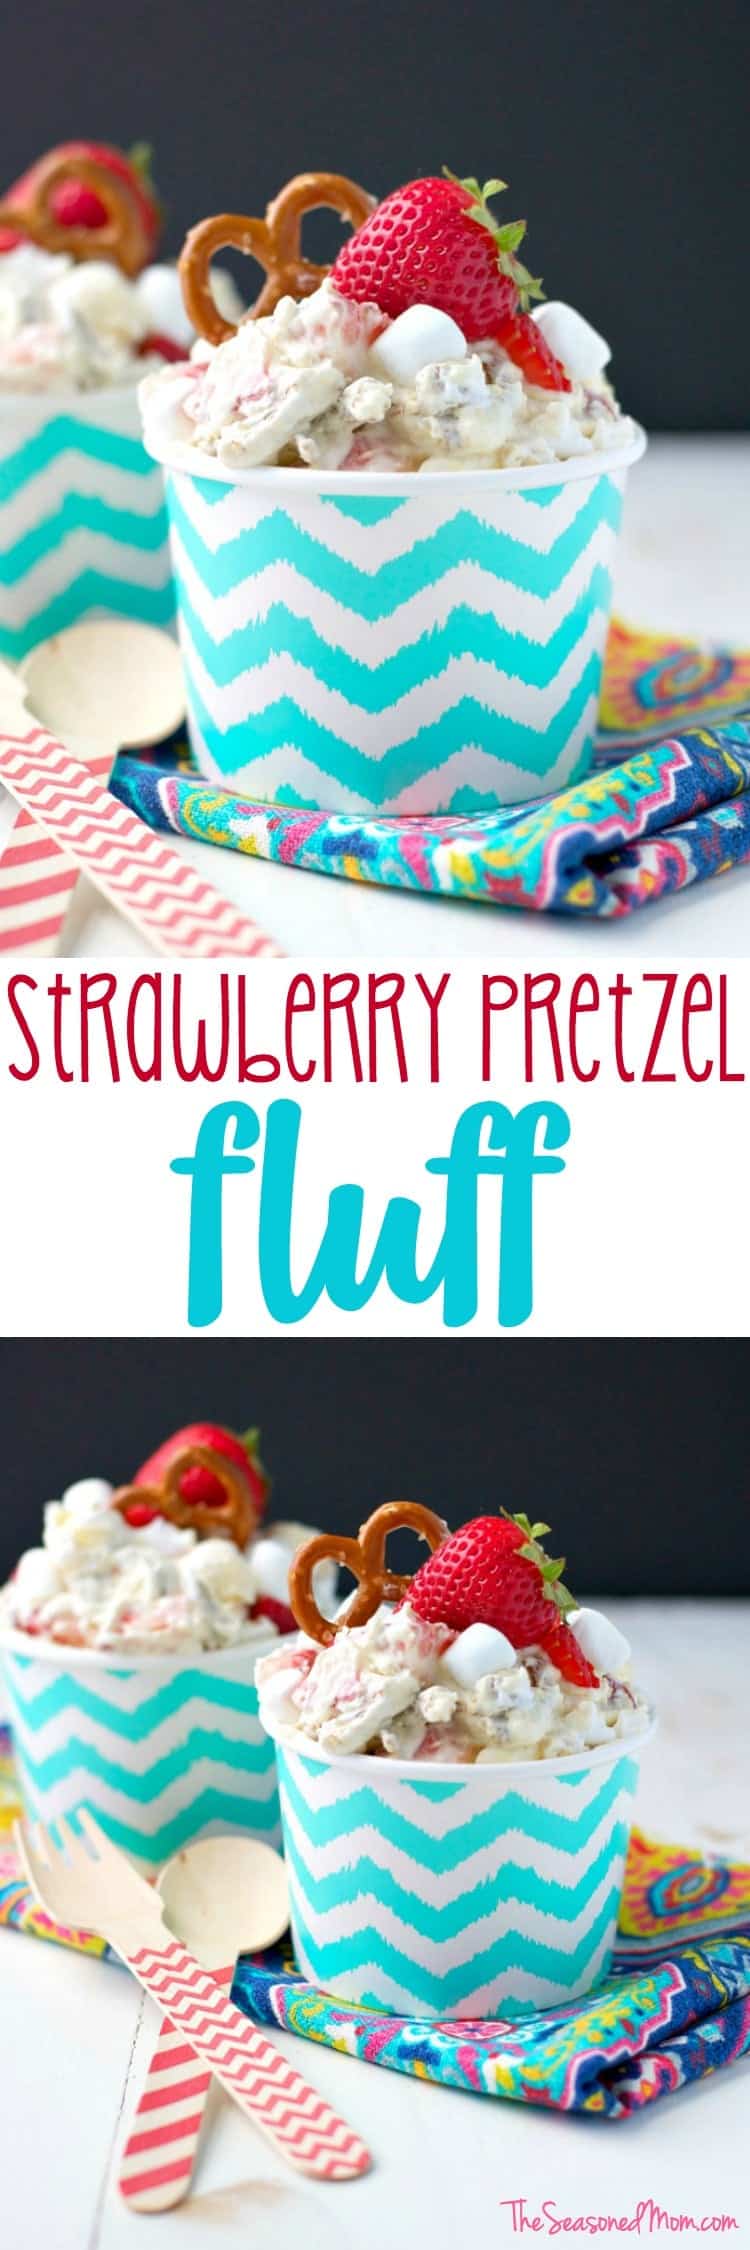 This salty, sweet, creamy, and crunchy Strawberry Pretzel Fluff is sure to be a hit at all of your summer parties! It's an easy 10-minute dessert salad that disappears FAST at any potluck, picnic, cookout, or other festive gathering!